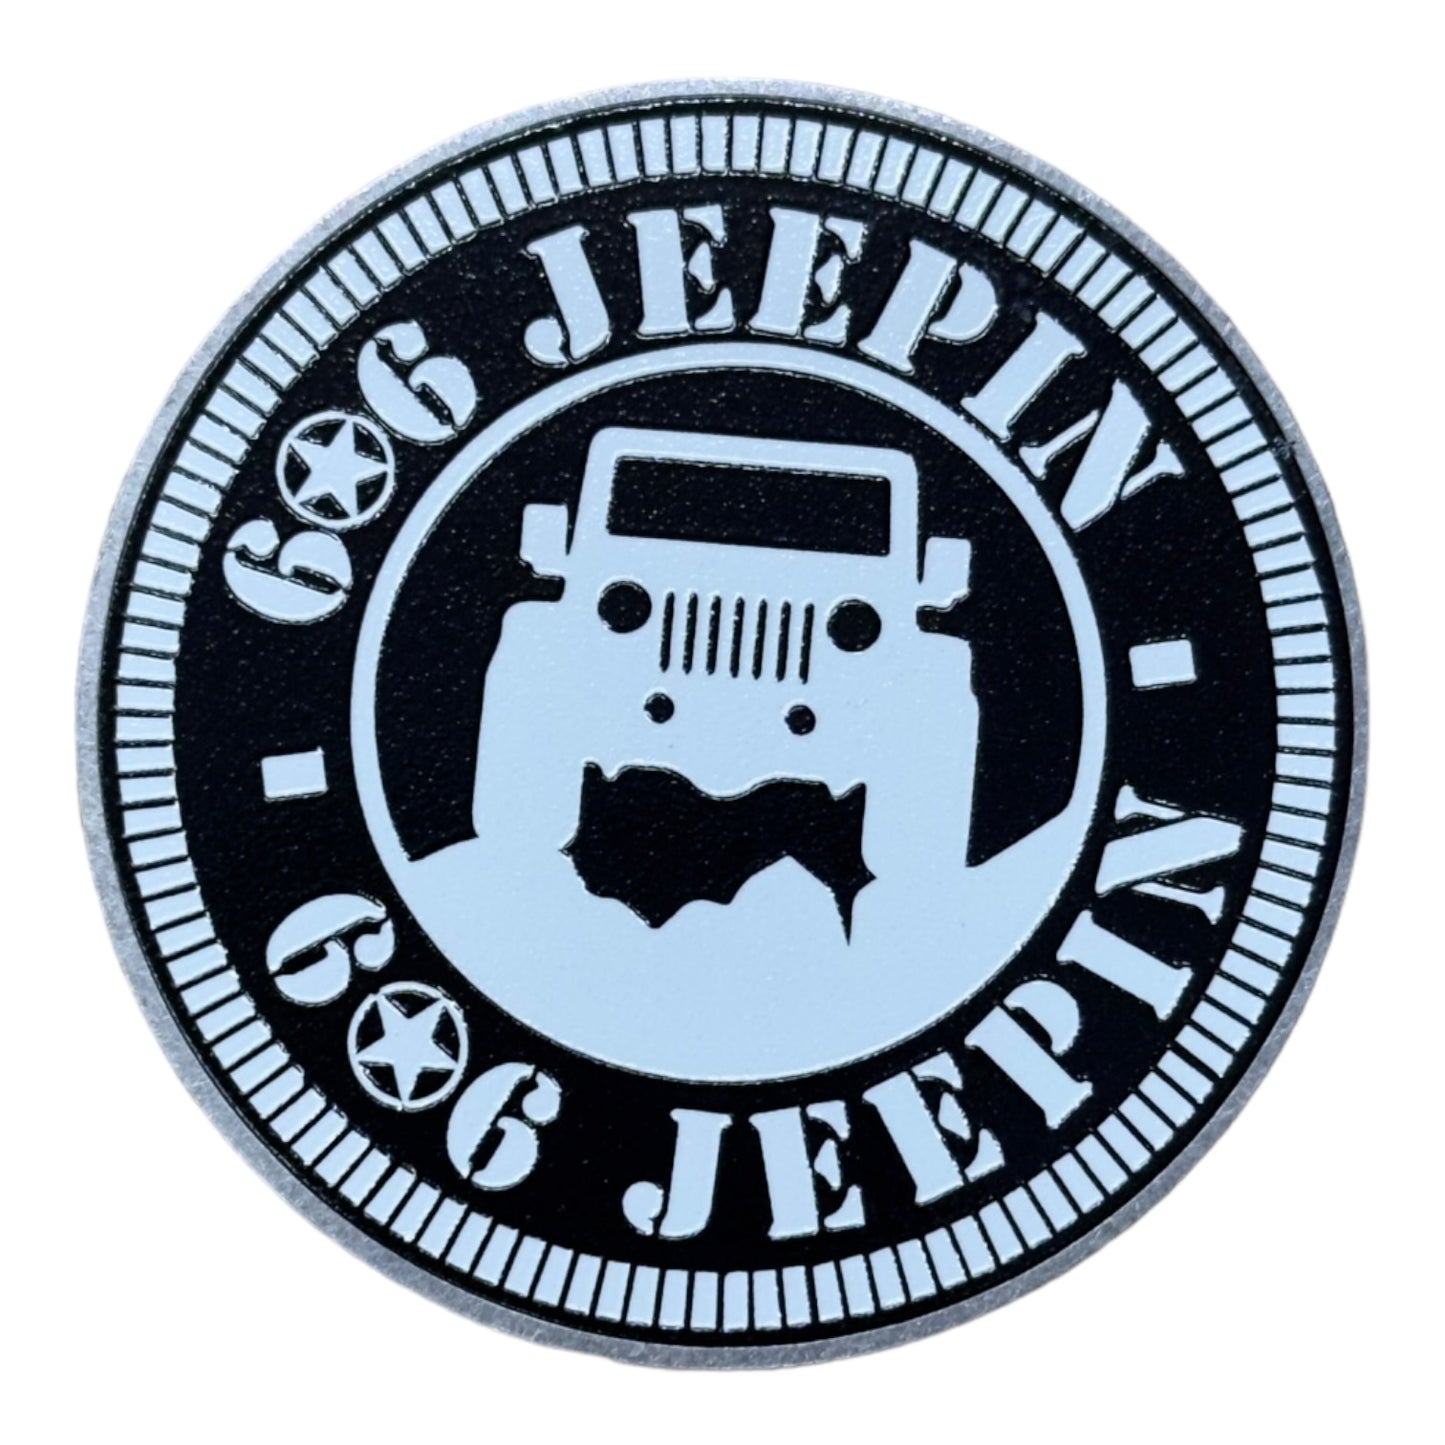 Badge - 606 Jeepin (Multiple Colors Available)